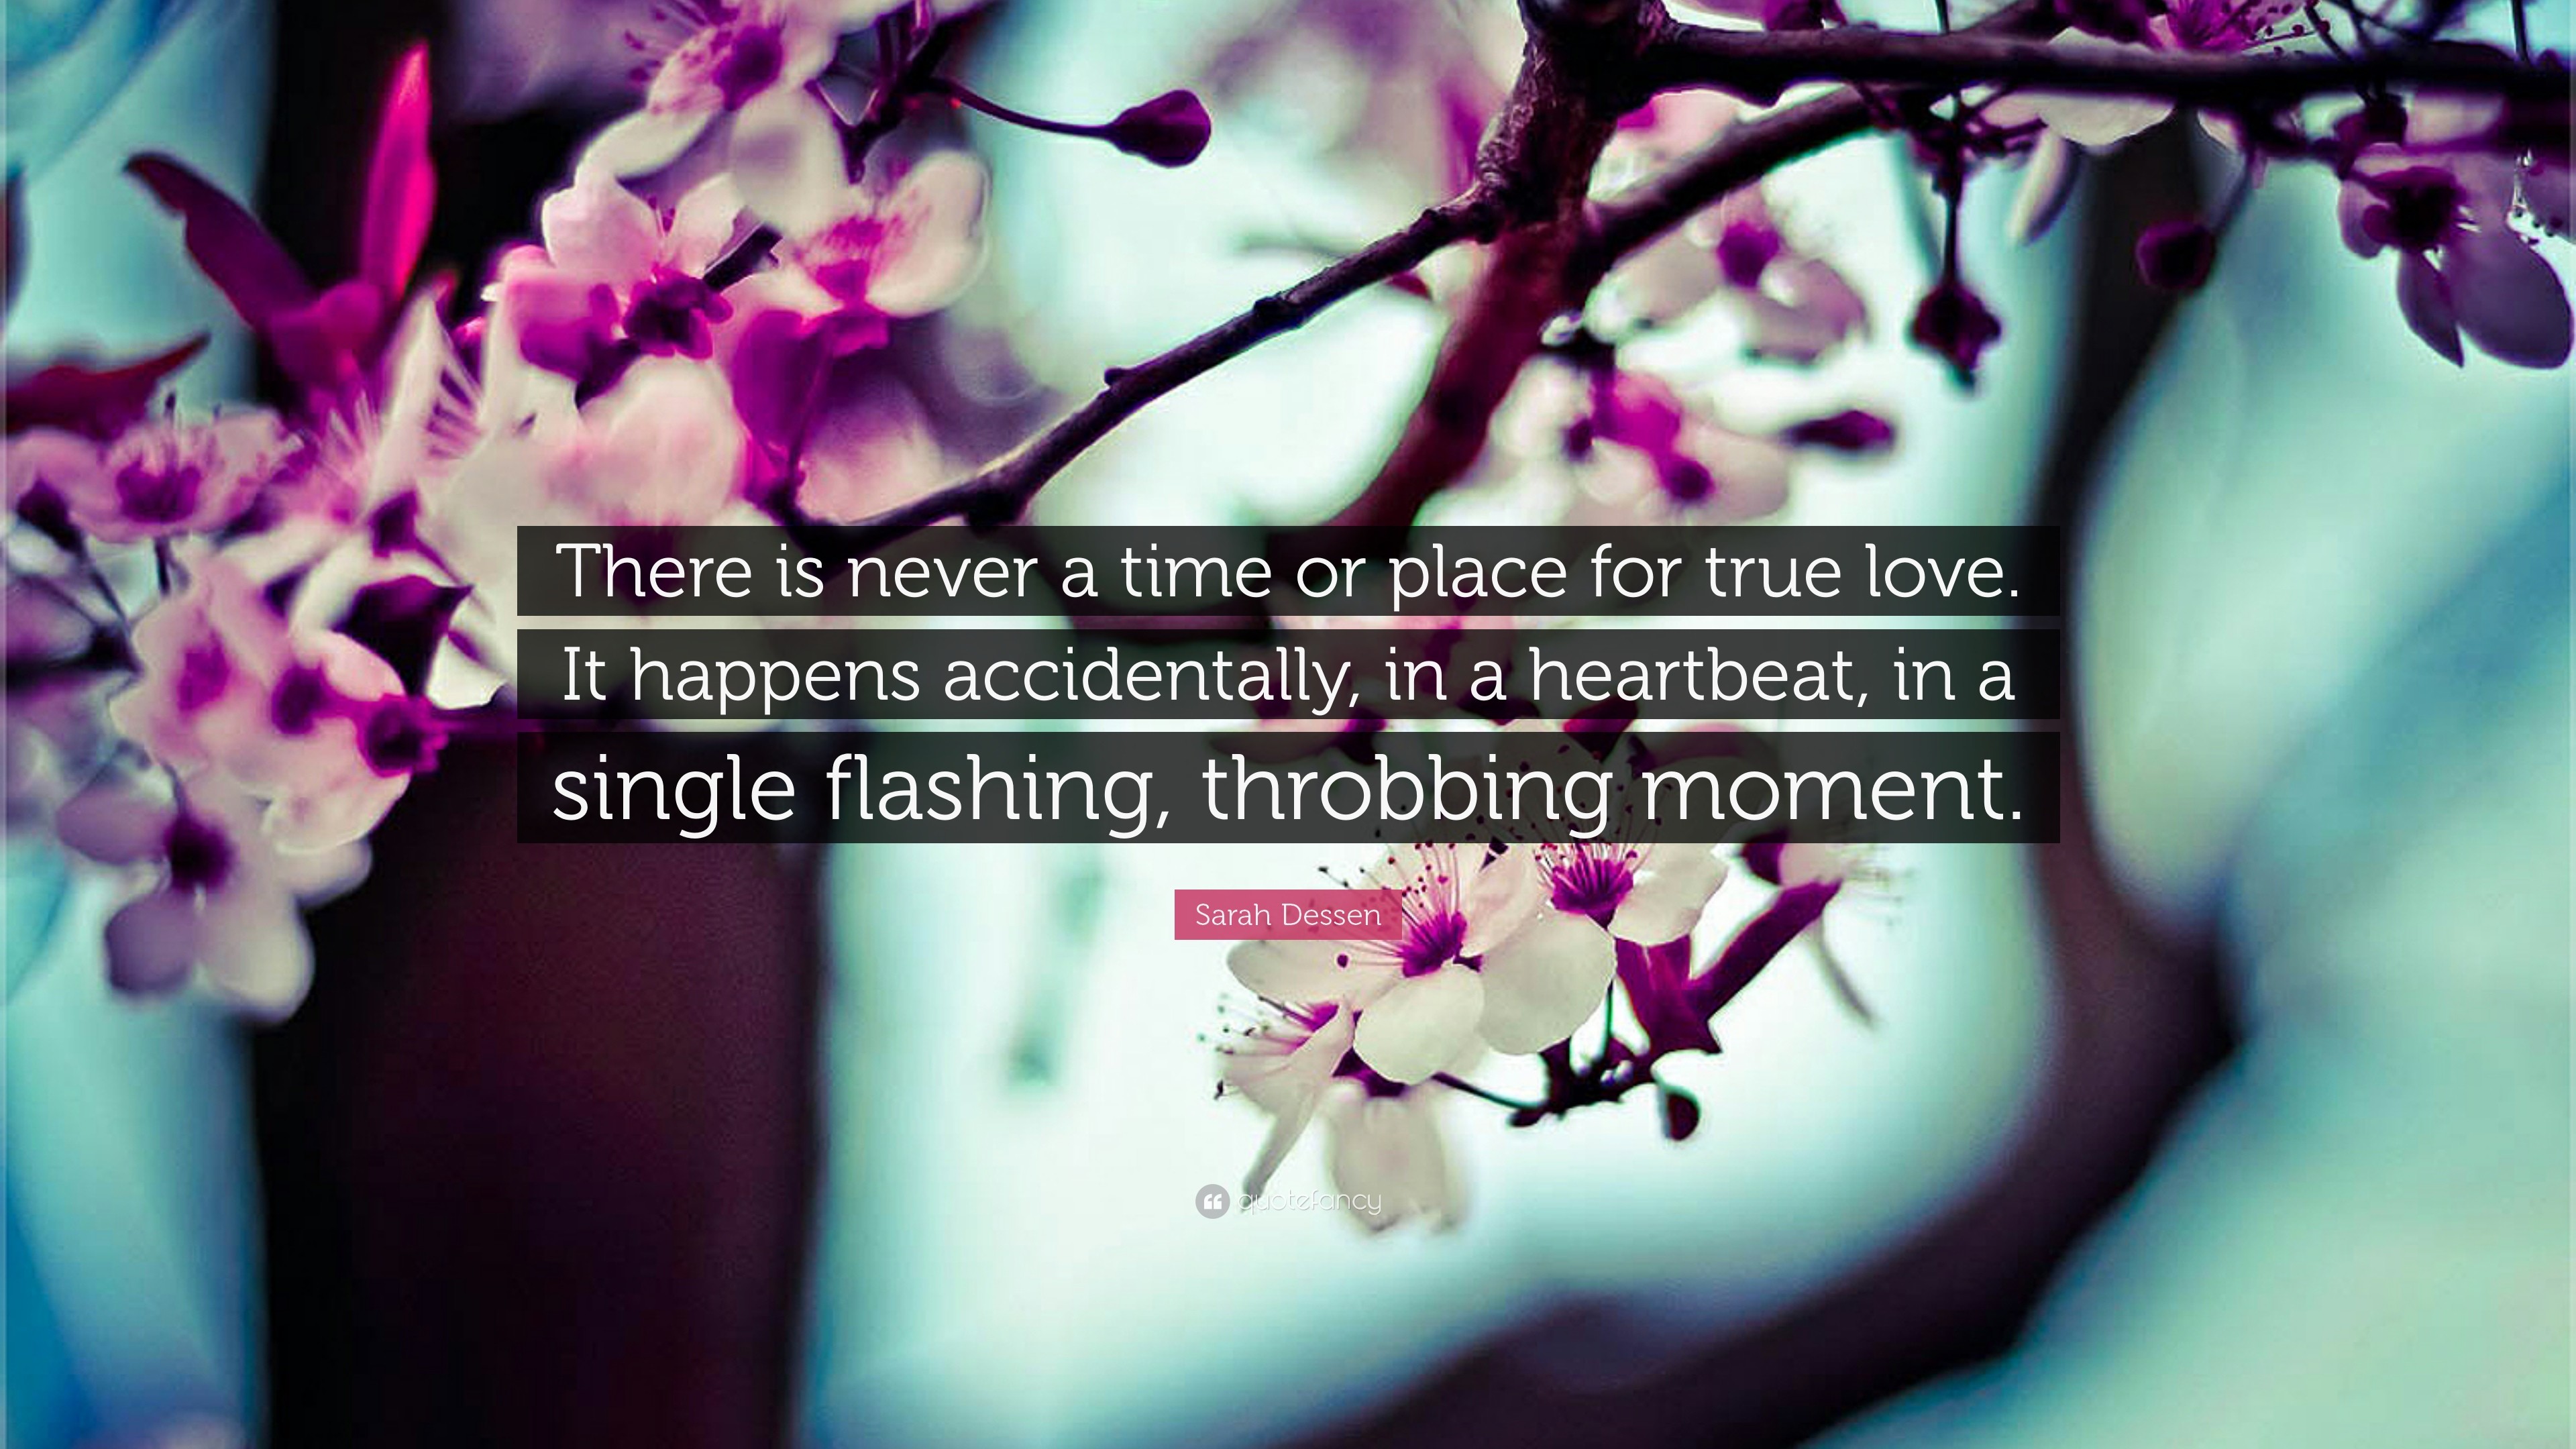 3840x2160 Sarah Dessen Quote: “There is never a time or place for true love.